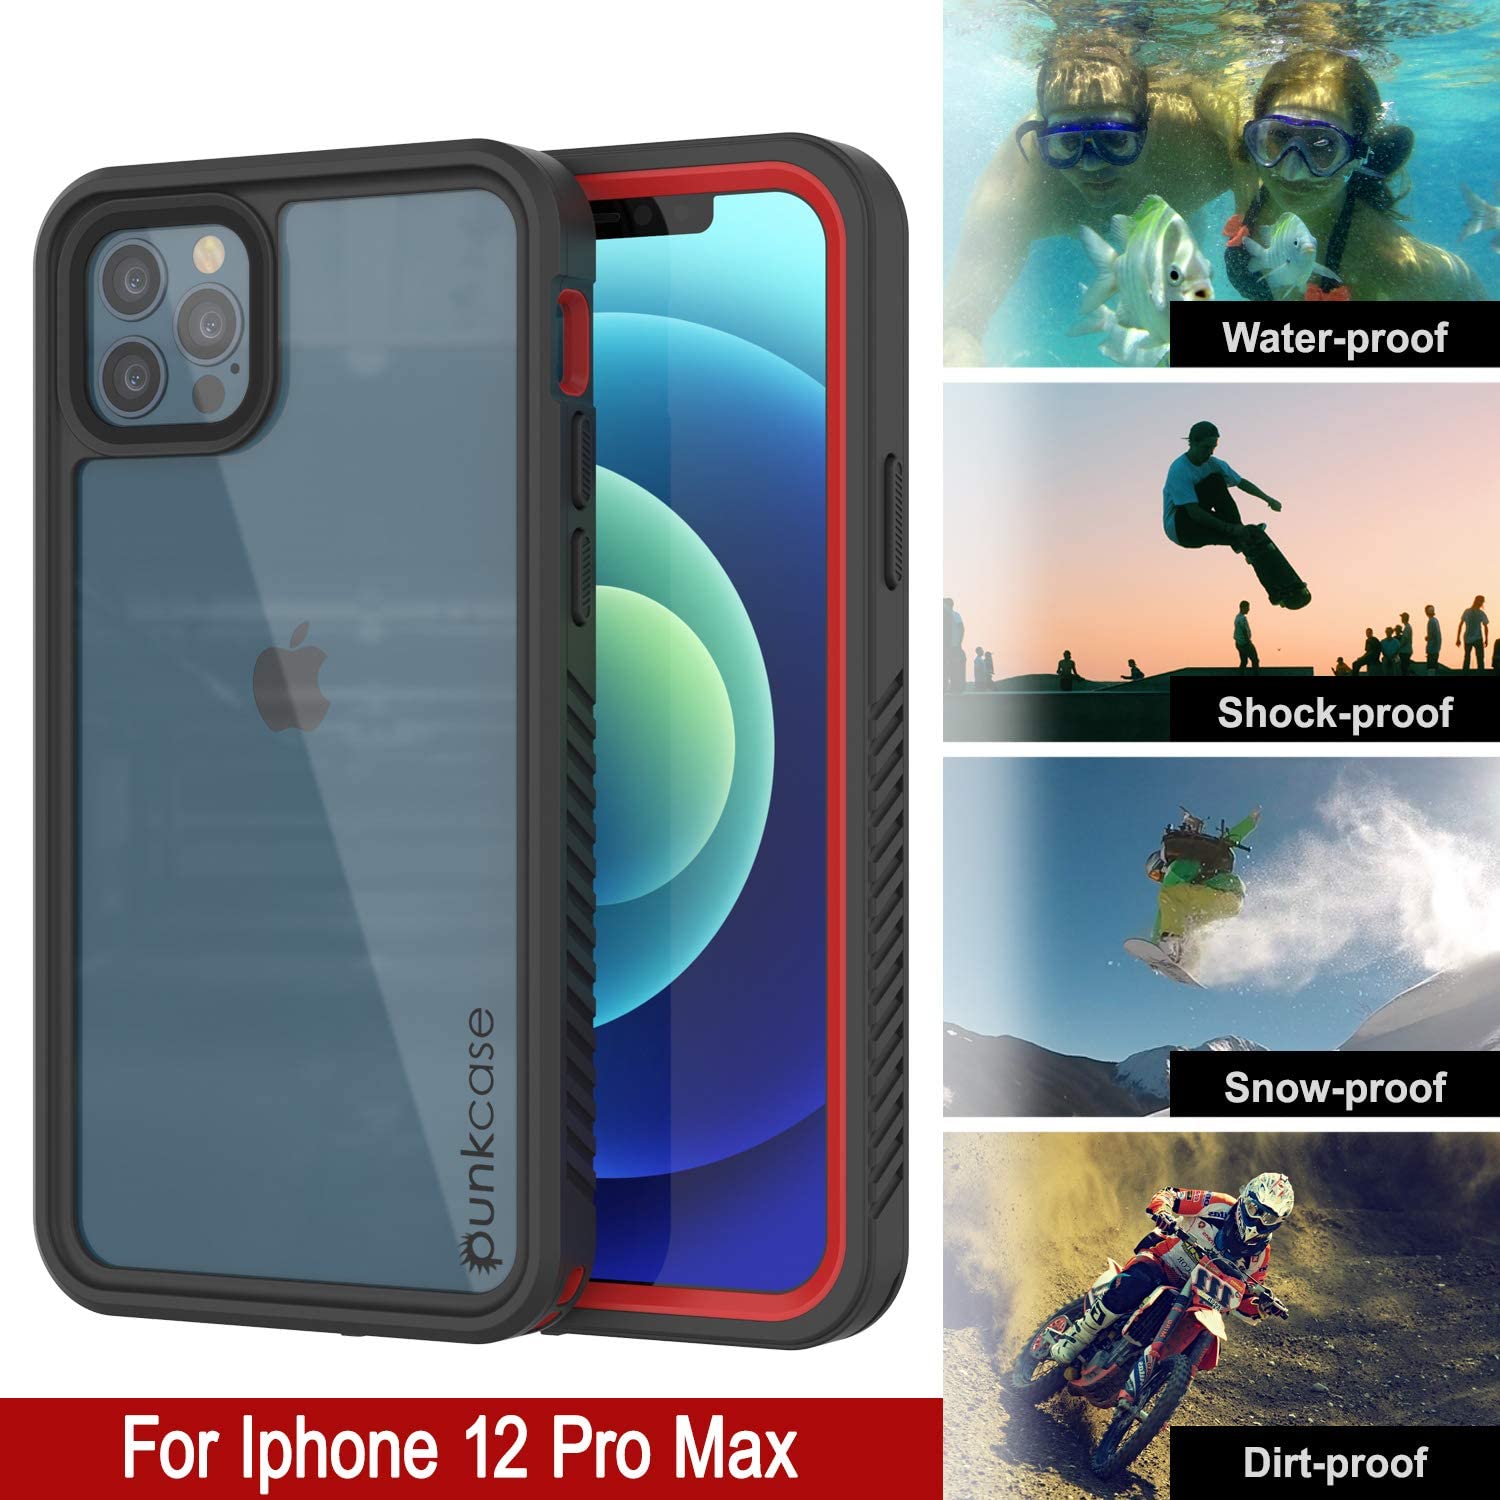 iPhone 12 Pro Max Waterproof Case, Punkcase [Extreme Series] Armor Cover W/ Built In Screen Protector [Red]